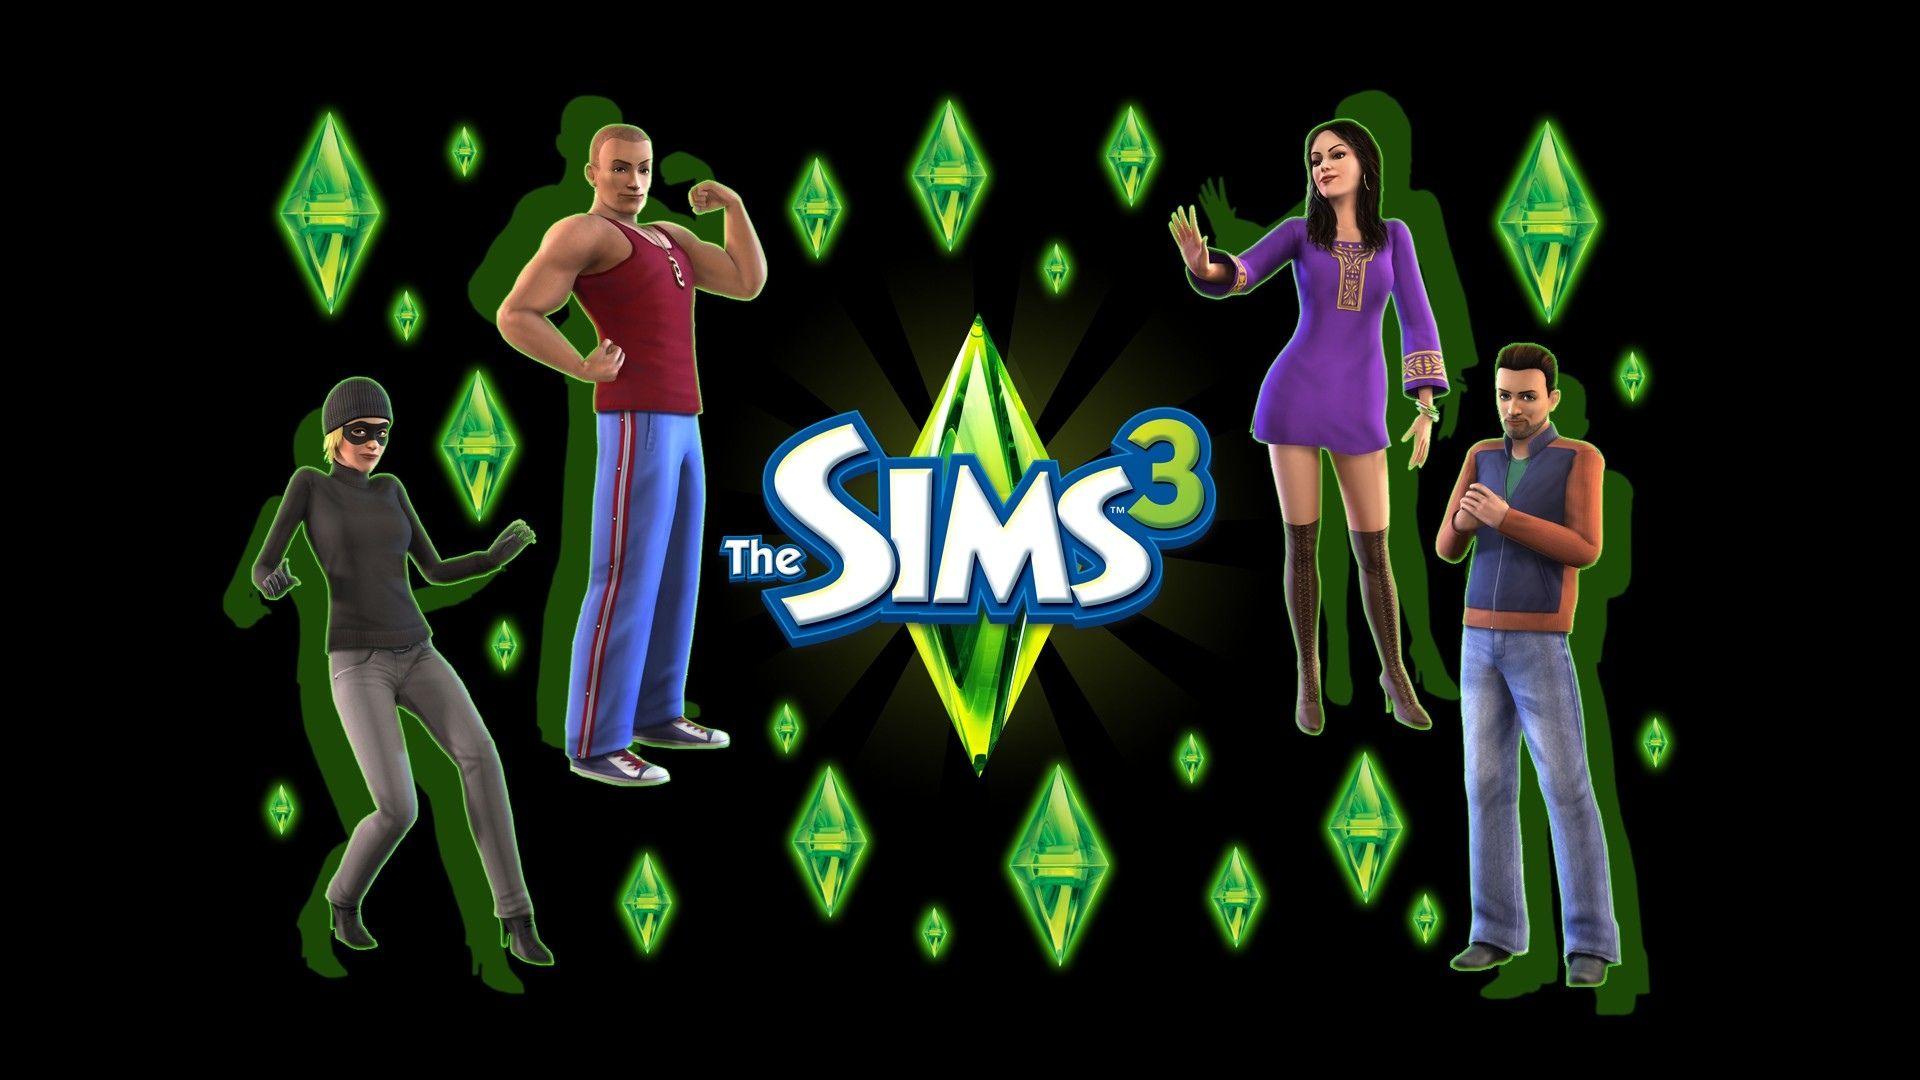 The Sims Computer Wallpapers, Desk 4K Backgrounds